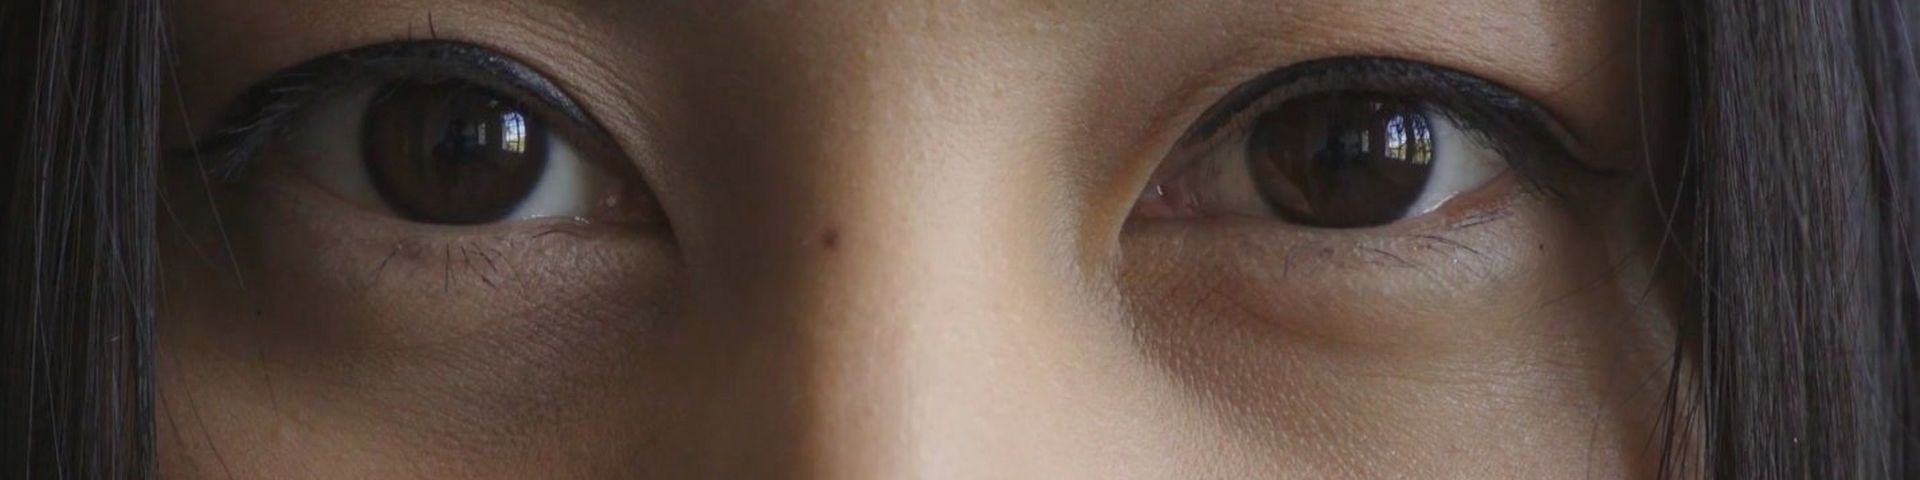 Close up of a woman’s eyes